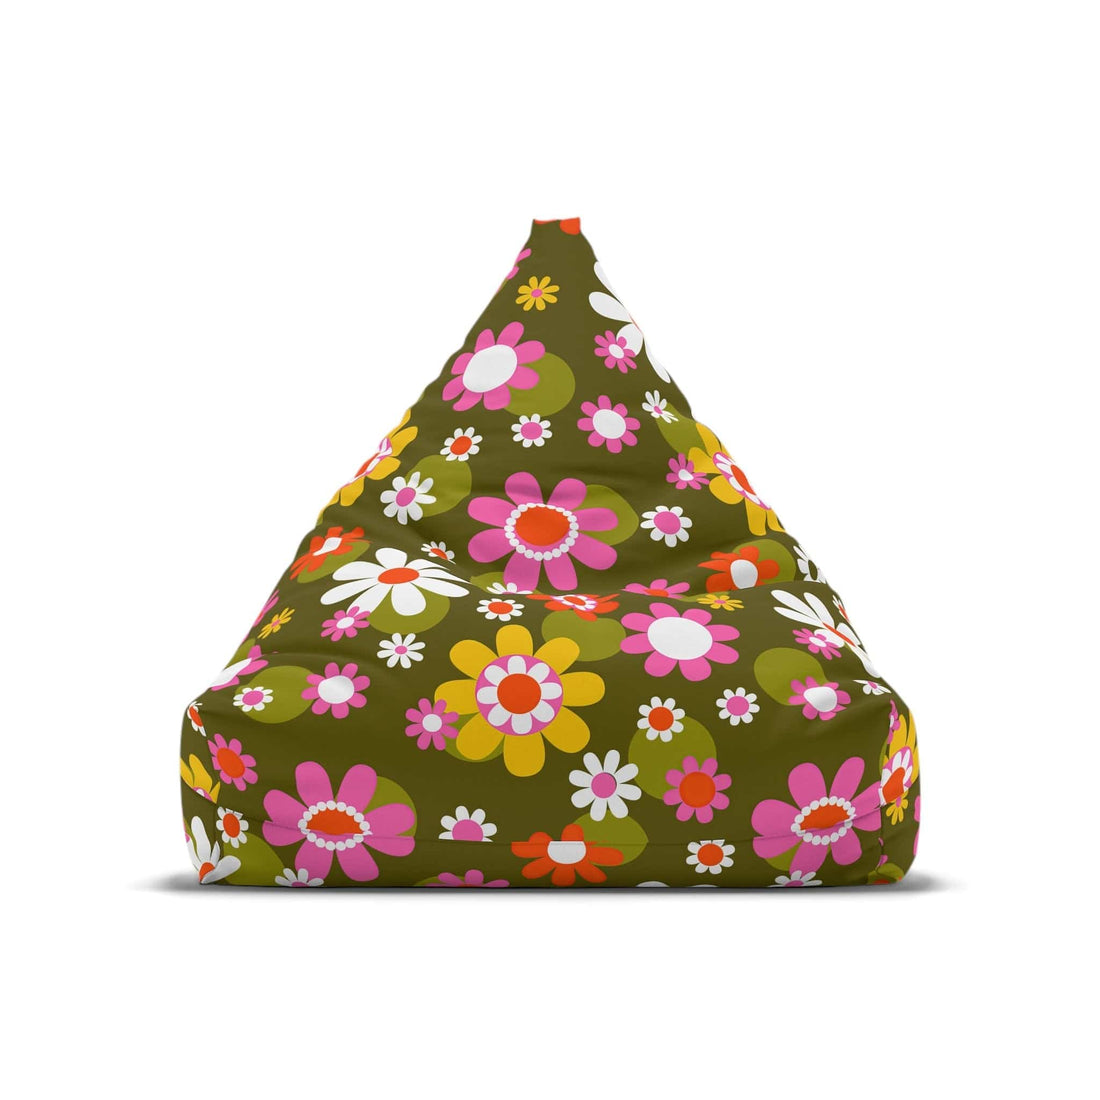 Kate McEnroe New York Retro Groovy Hippie Daisy Flower Power Bean Bag Chair Cover for Adult and Teens, Mid Century Dining Lounge Chair, 70s MCM Living Room DecorBean Bag Chair Covers28615237016422373352